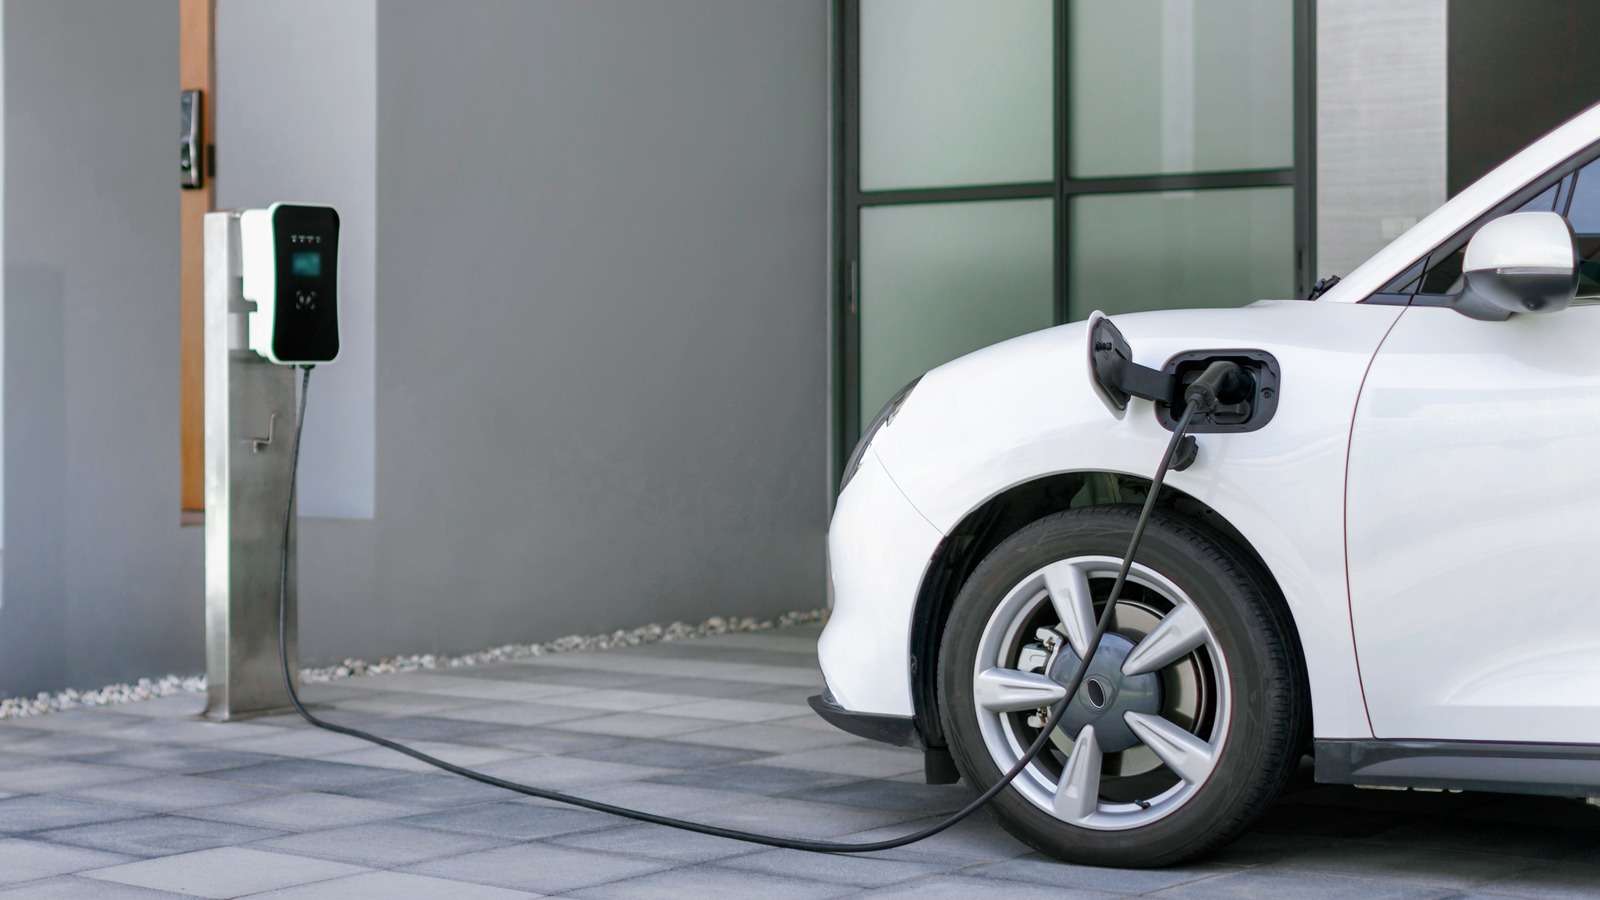 BMW, Ford And Honda Have A Cunning Plan To Make Your EV More Useful When It’s Parked